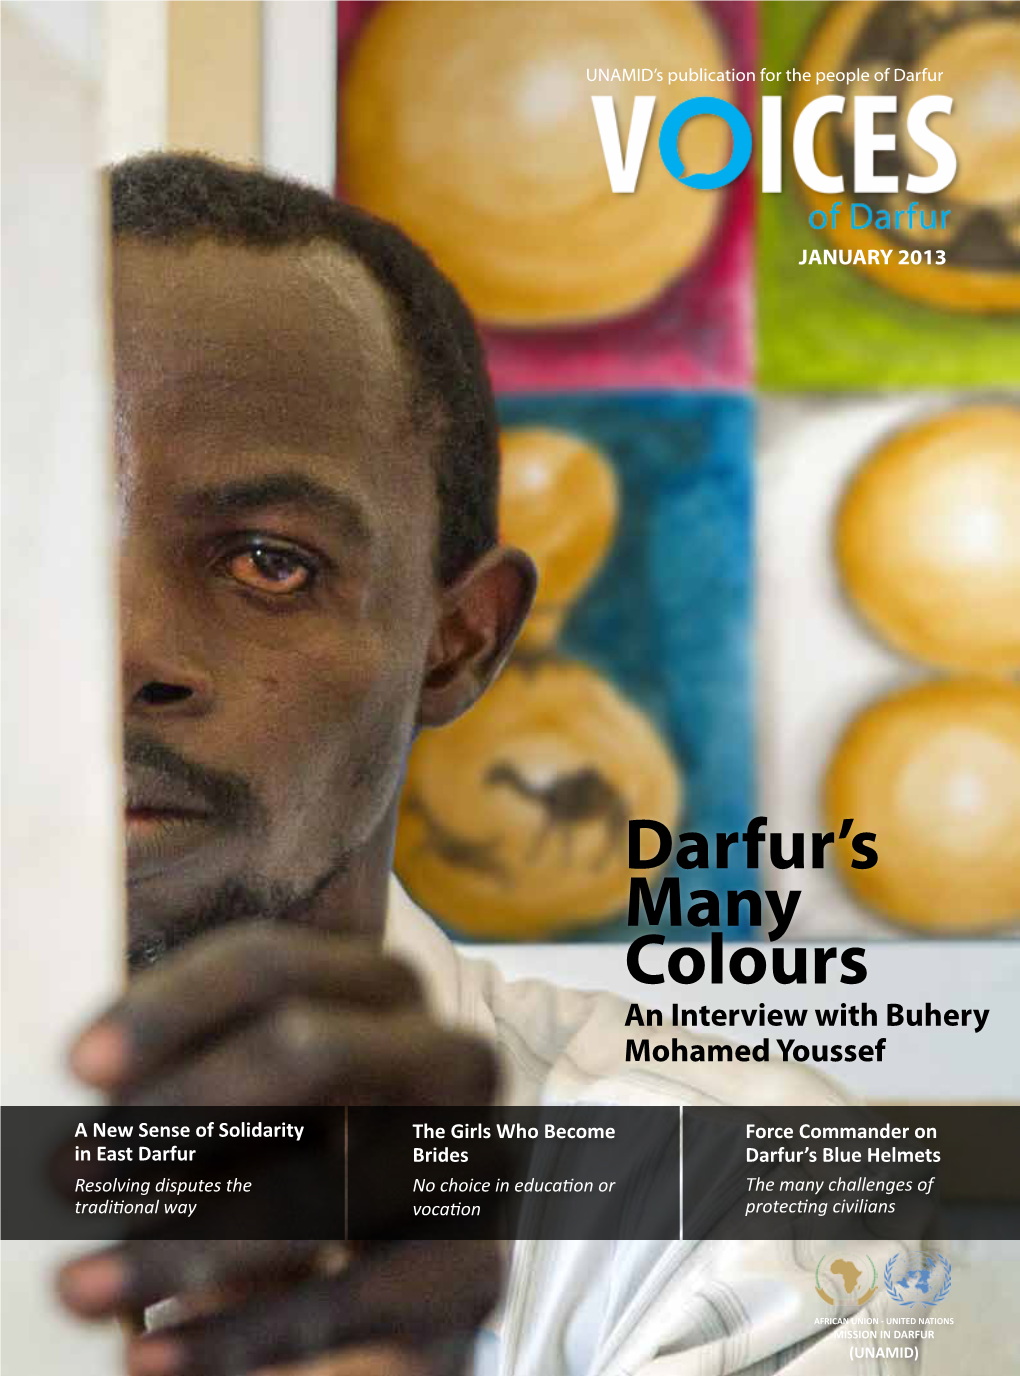 Darfur's Many Colours